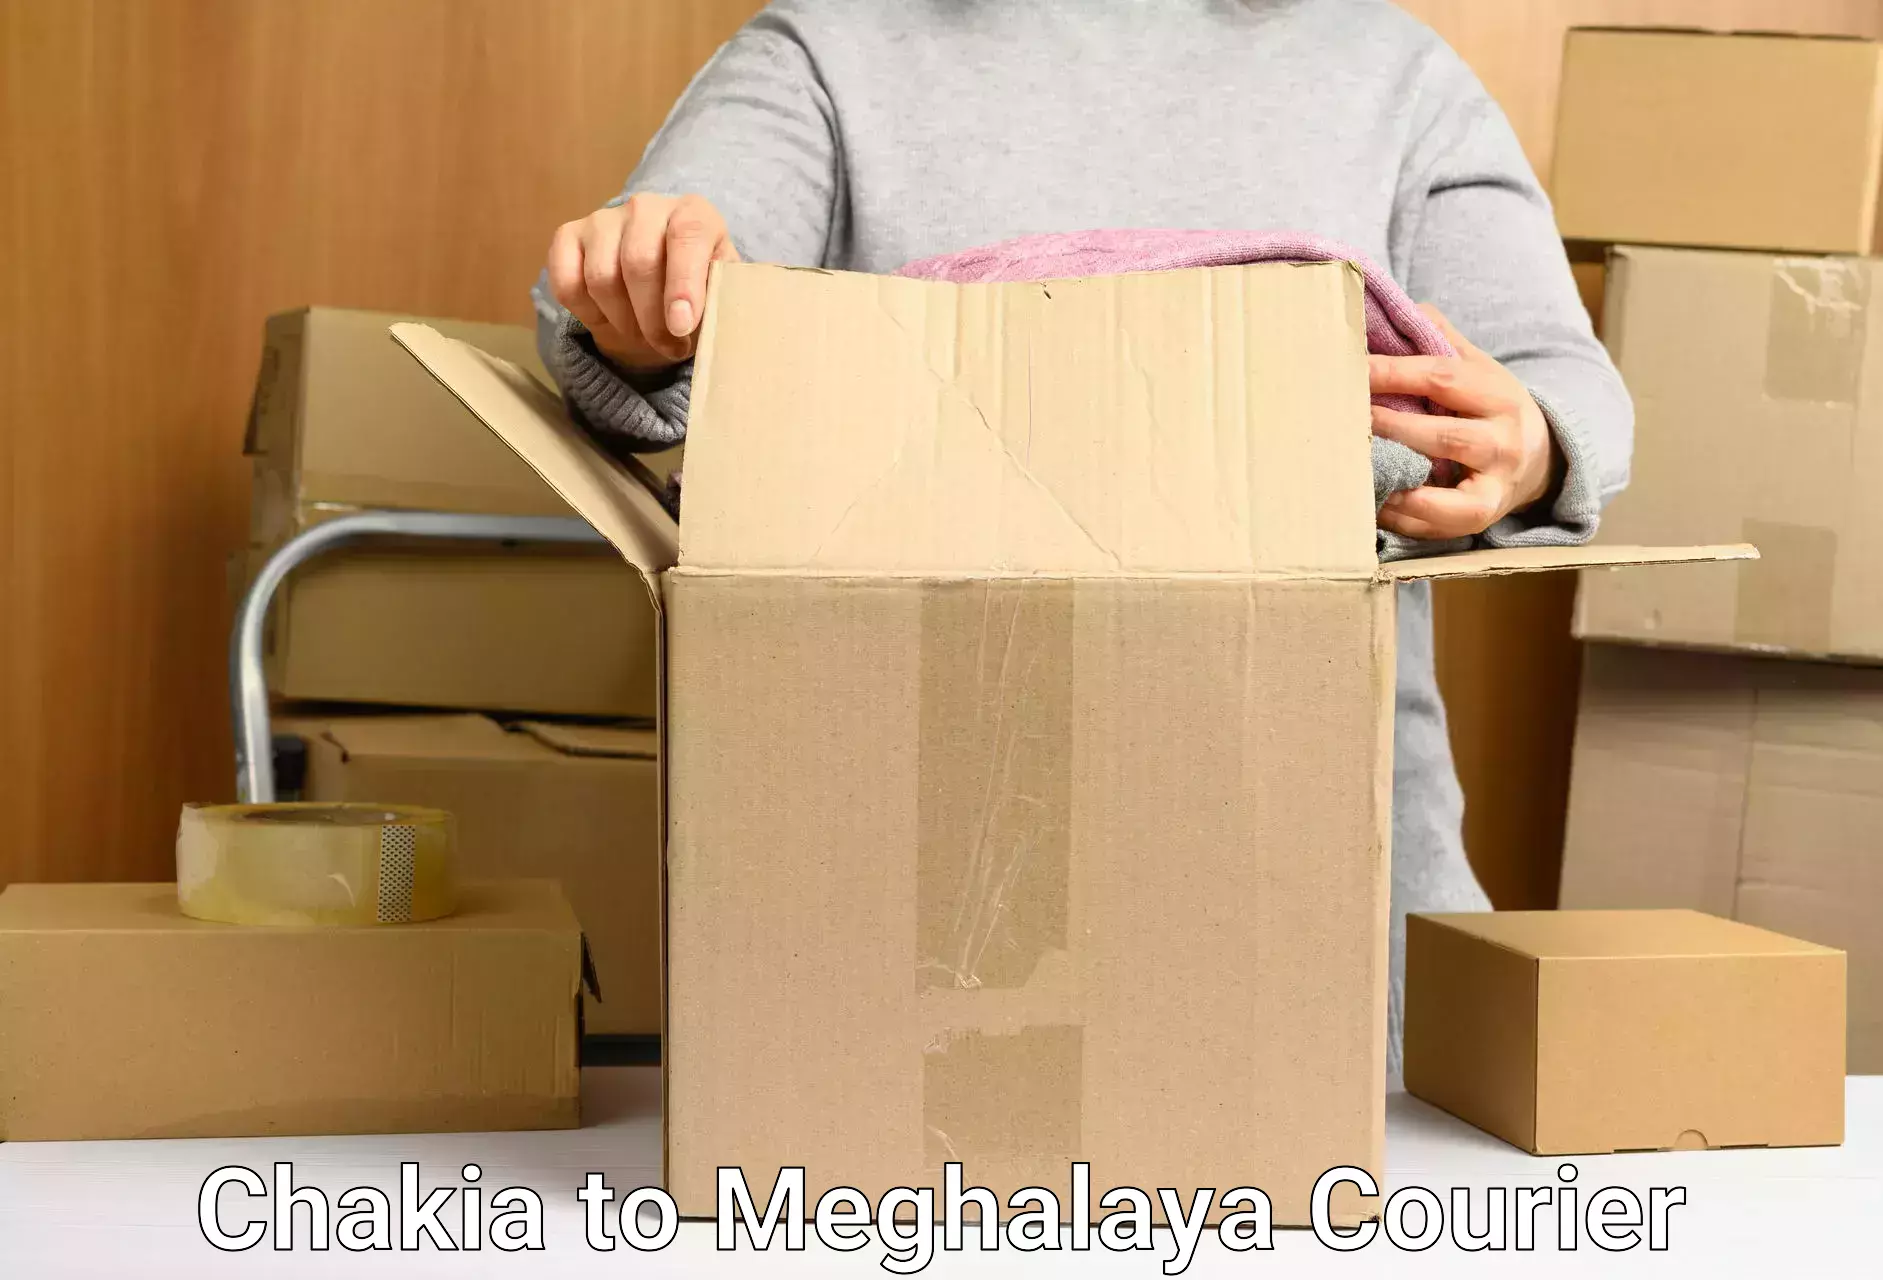 Automated parcel services Chakia to Meghalaya